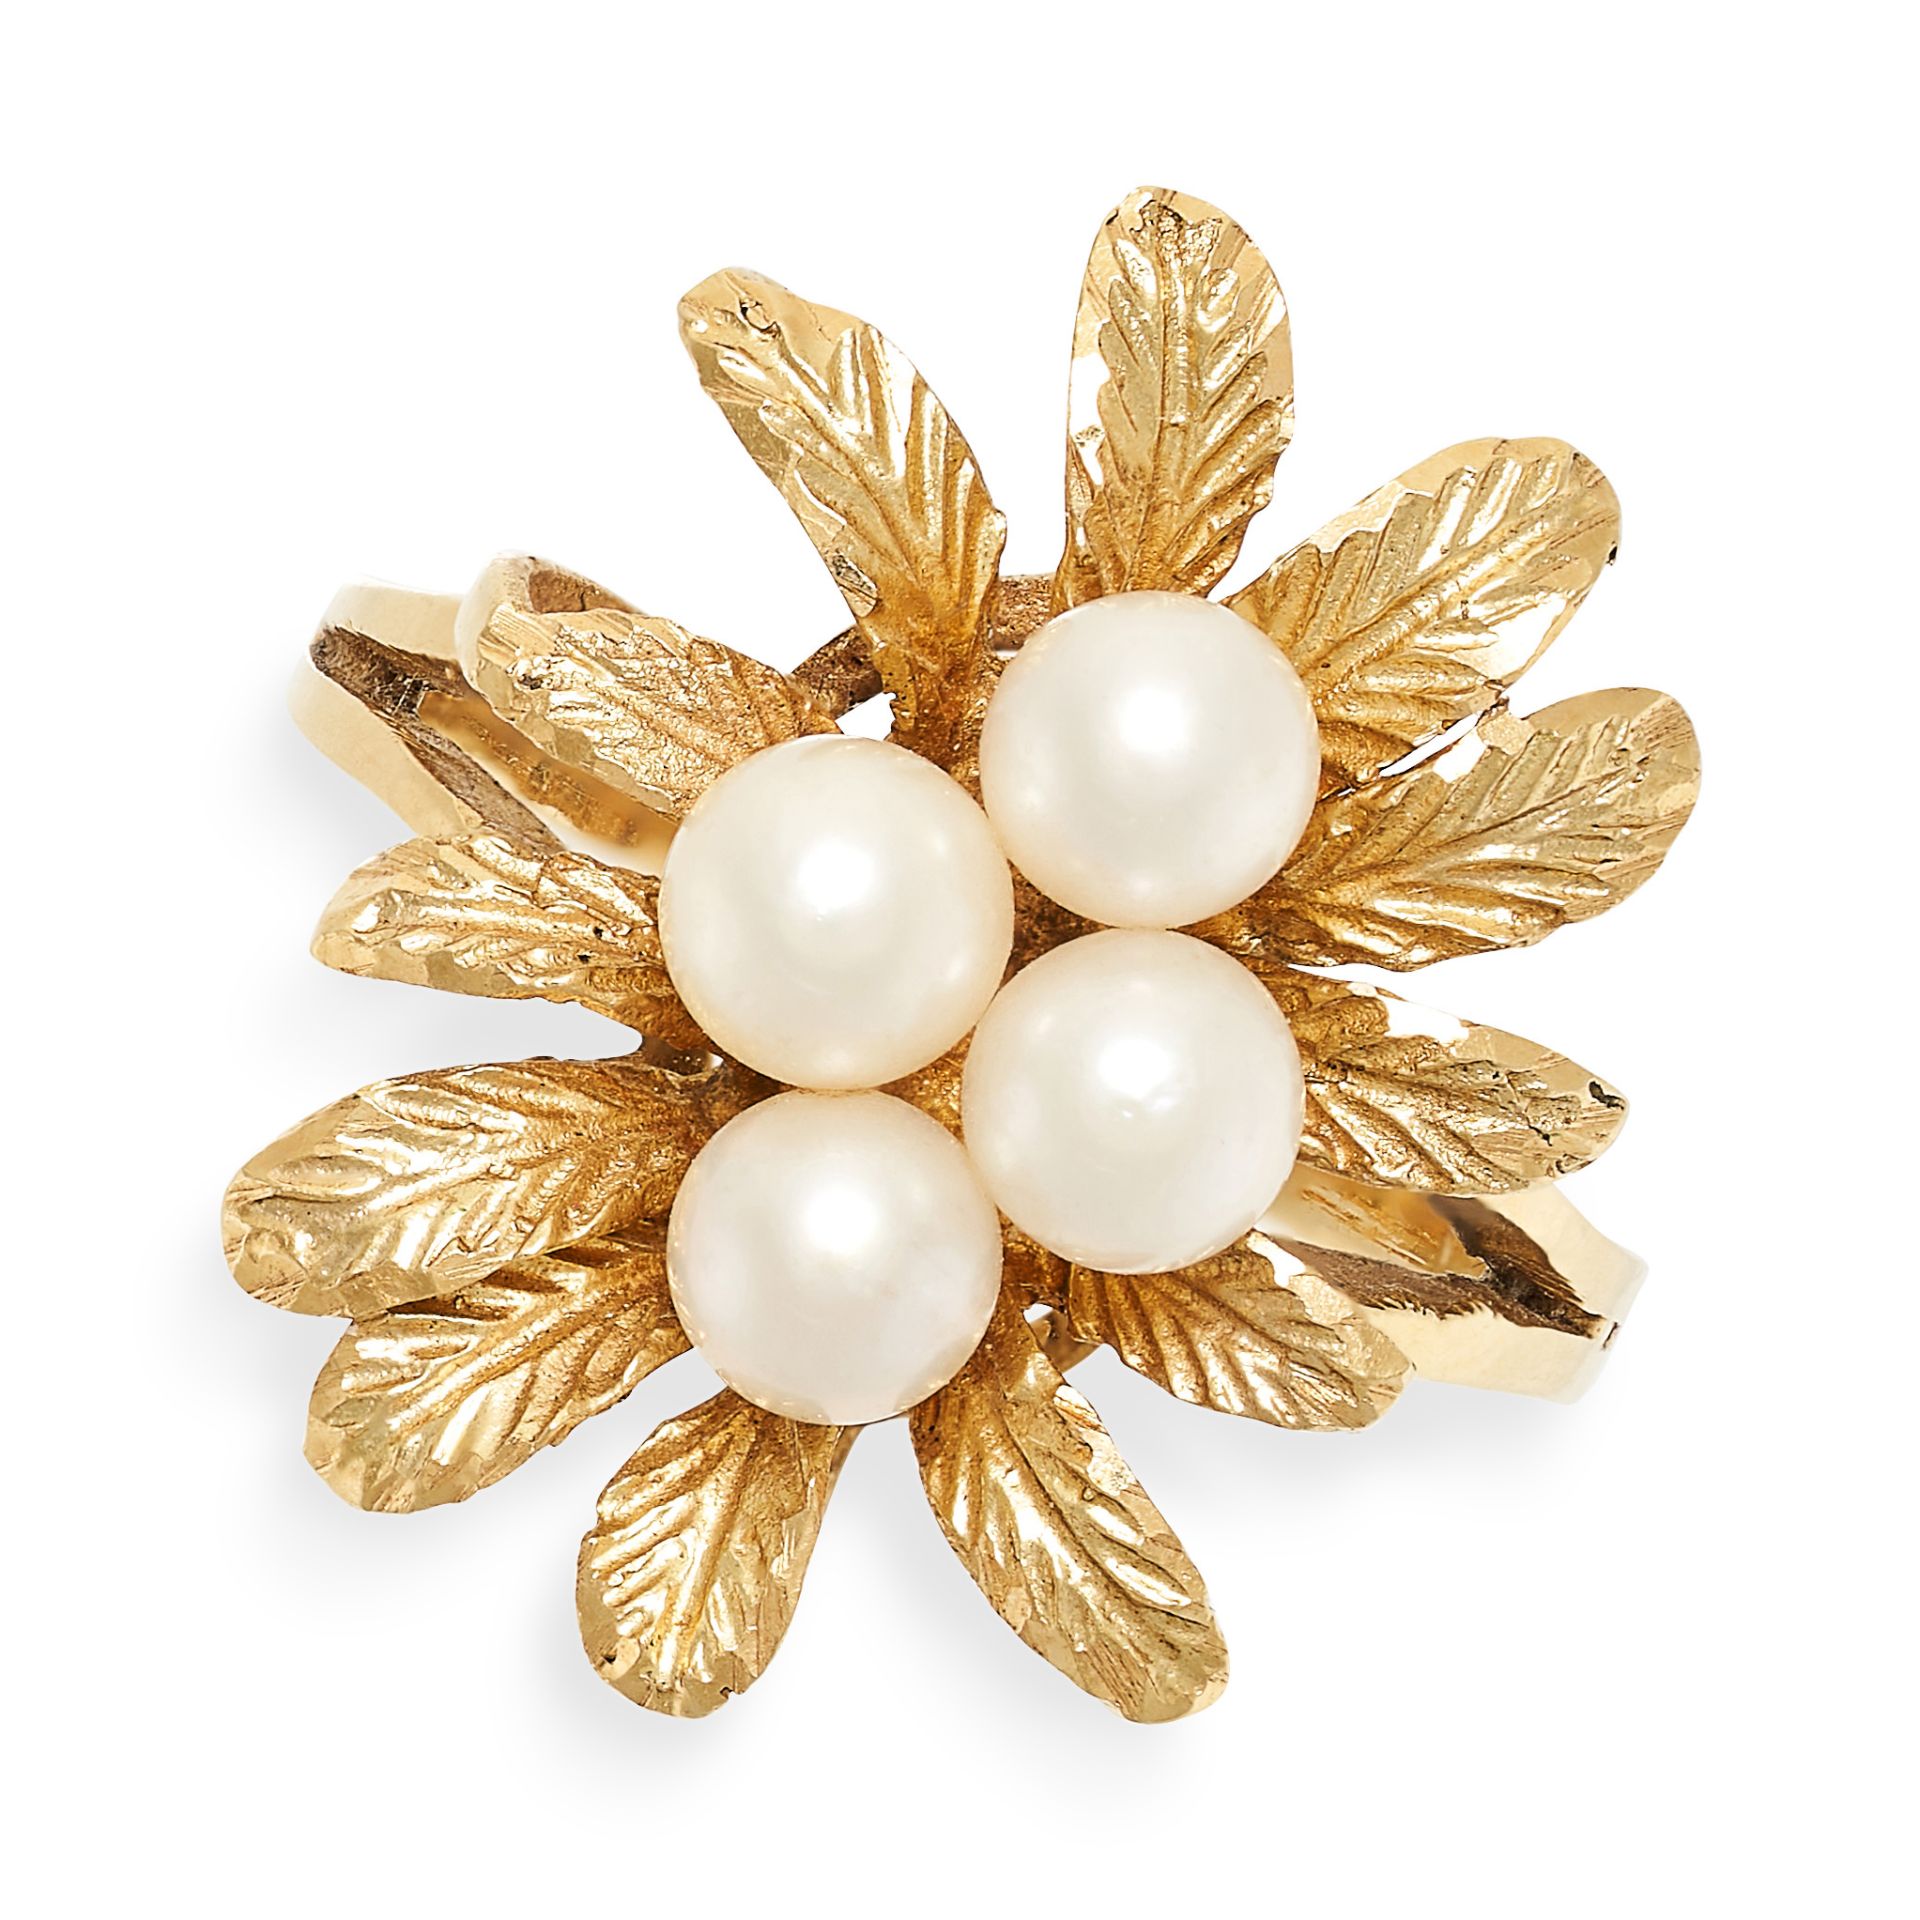 A VINTAGE PEARL RING set with a cluster of pearls accented by gold leaves, no assay marks, size